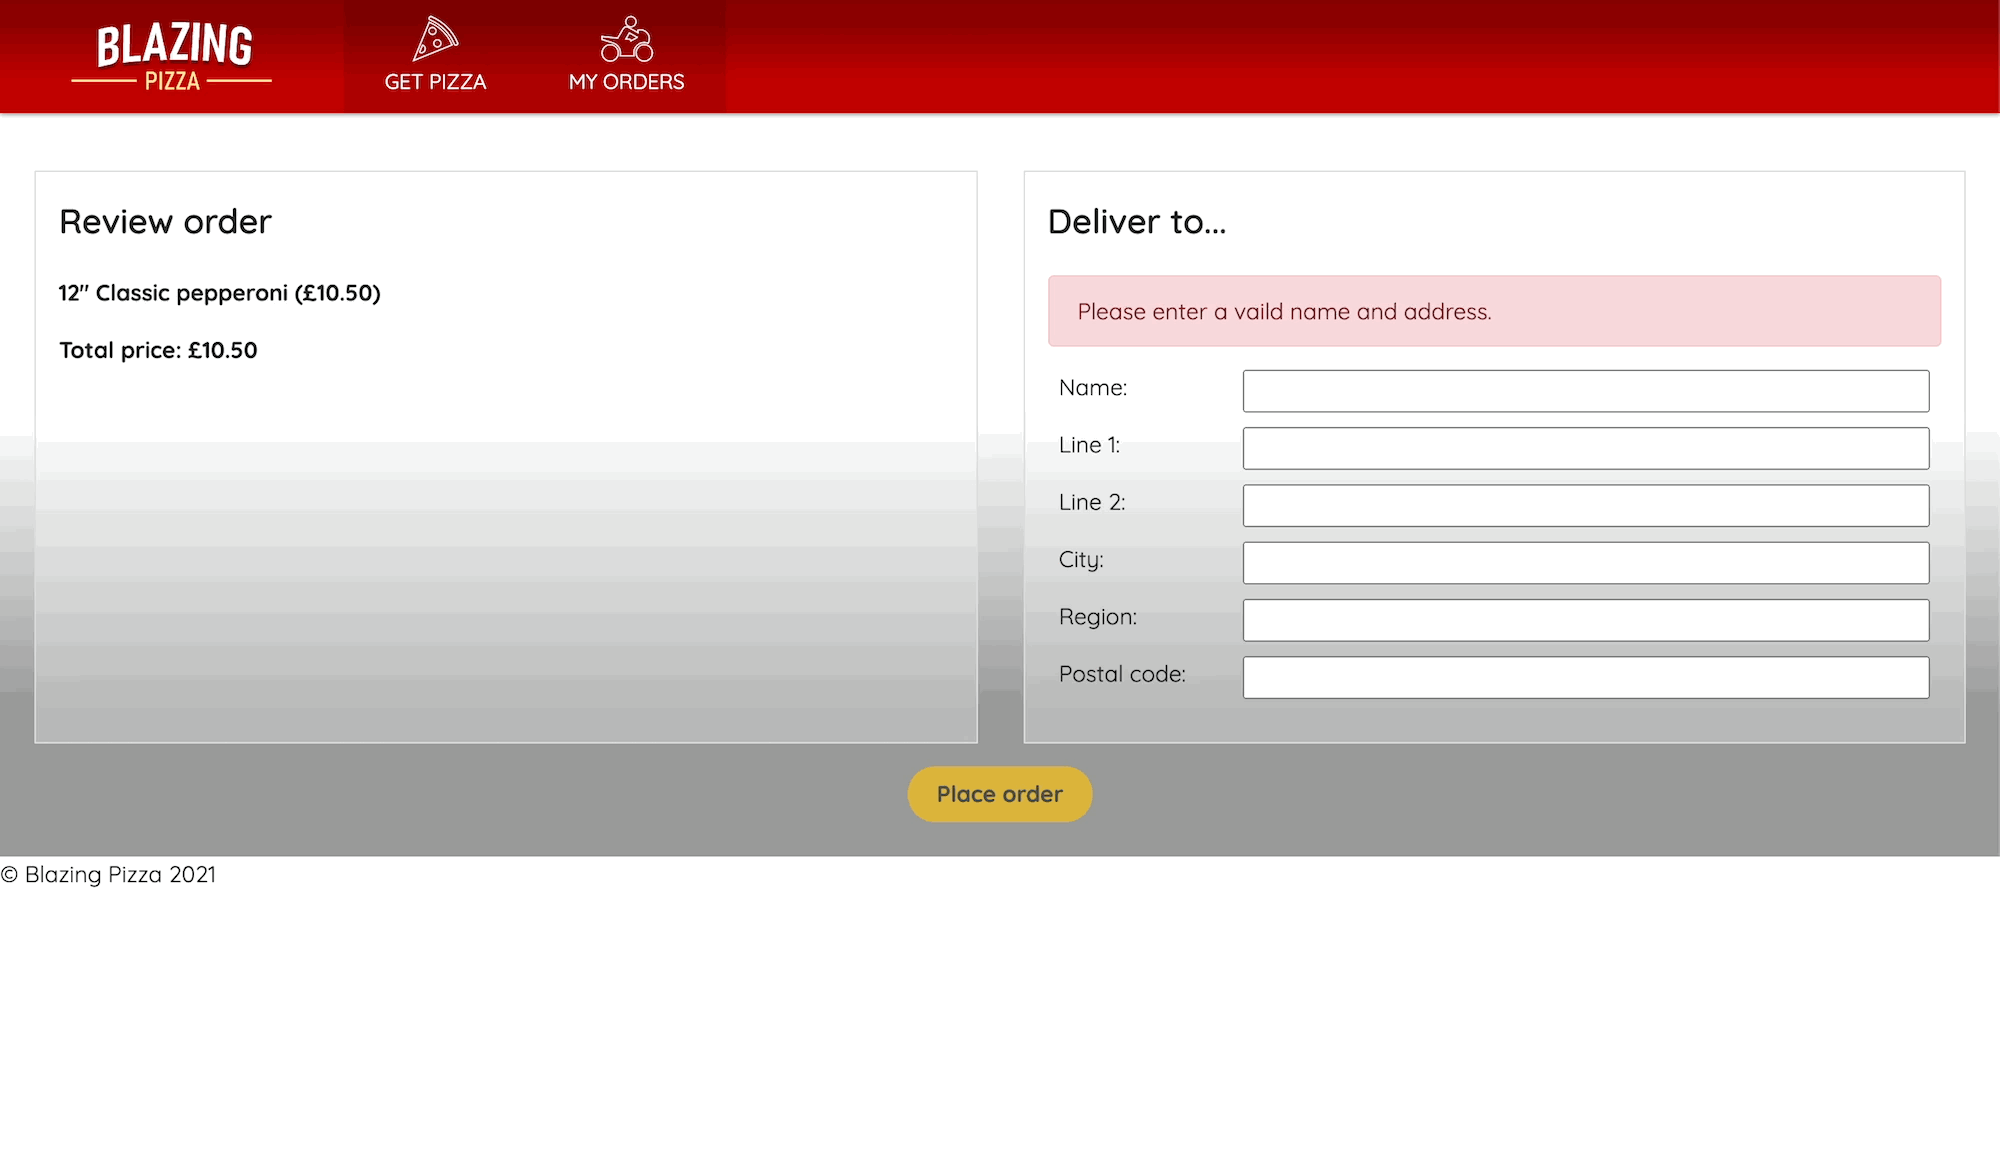 Animated gif showing that the Place order button is disabled until all the fields have correct values.